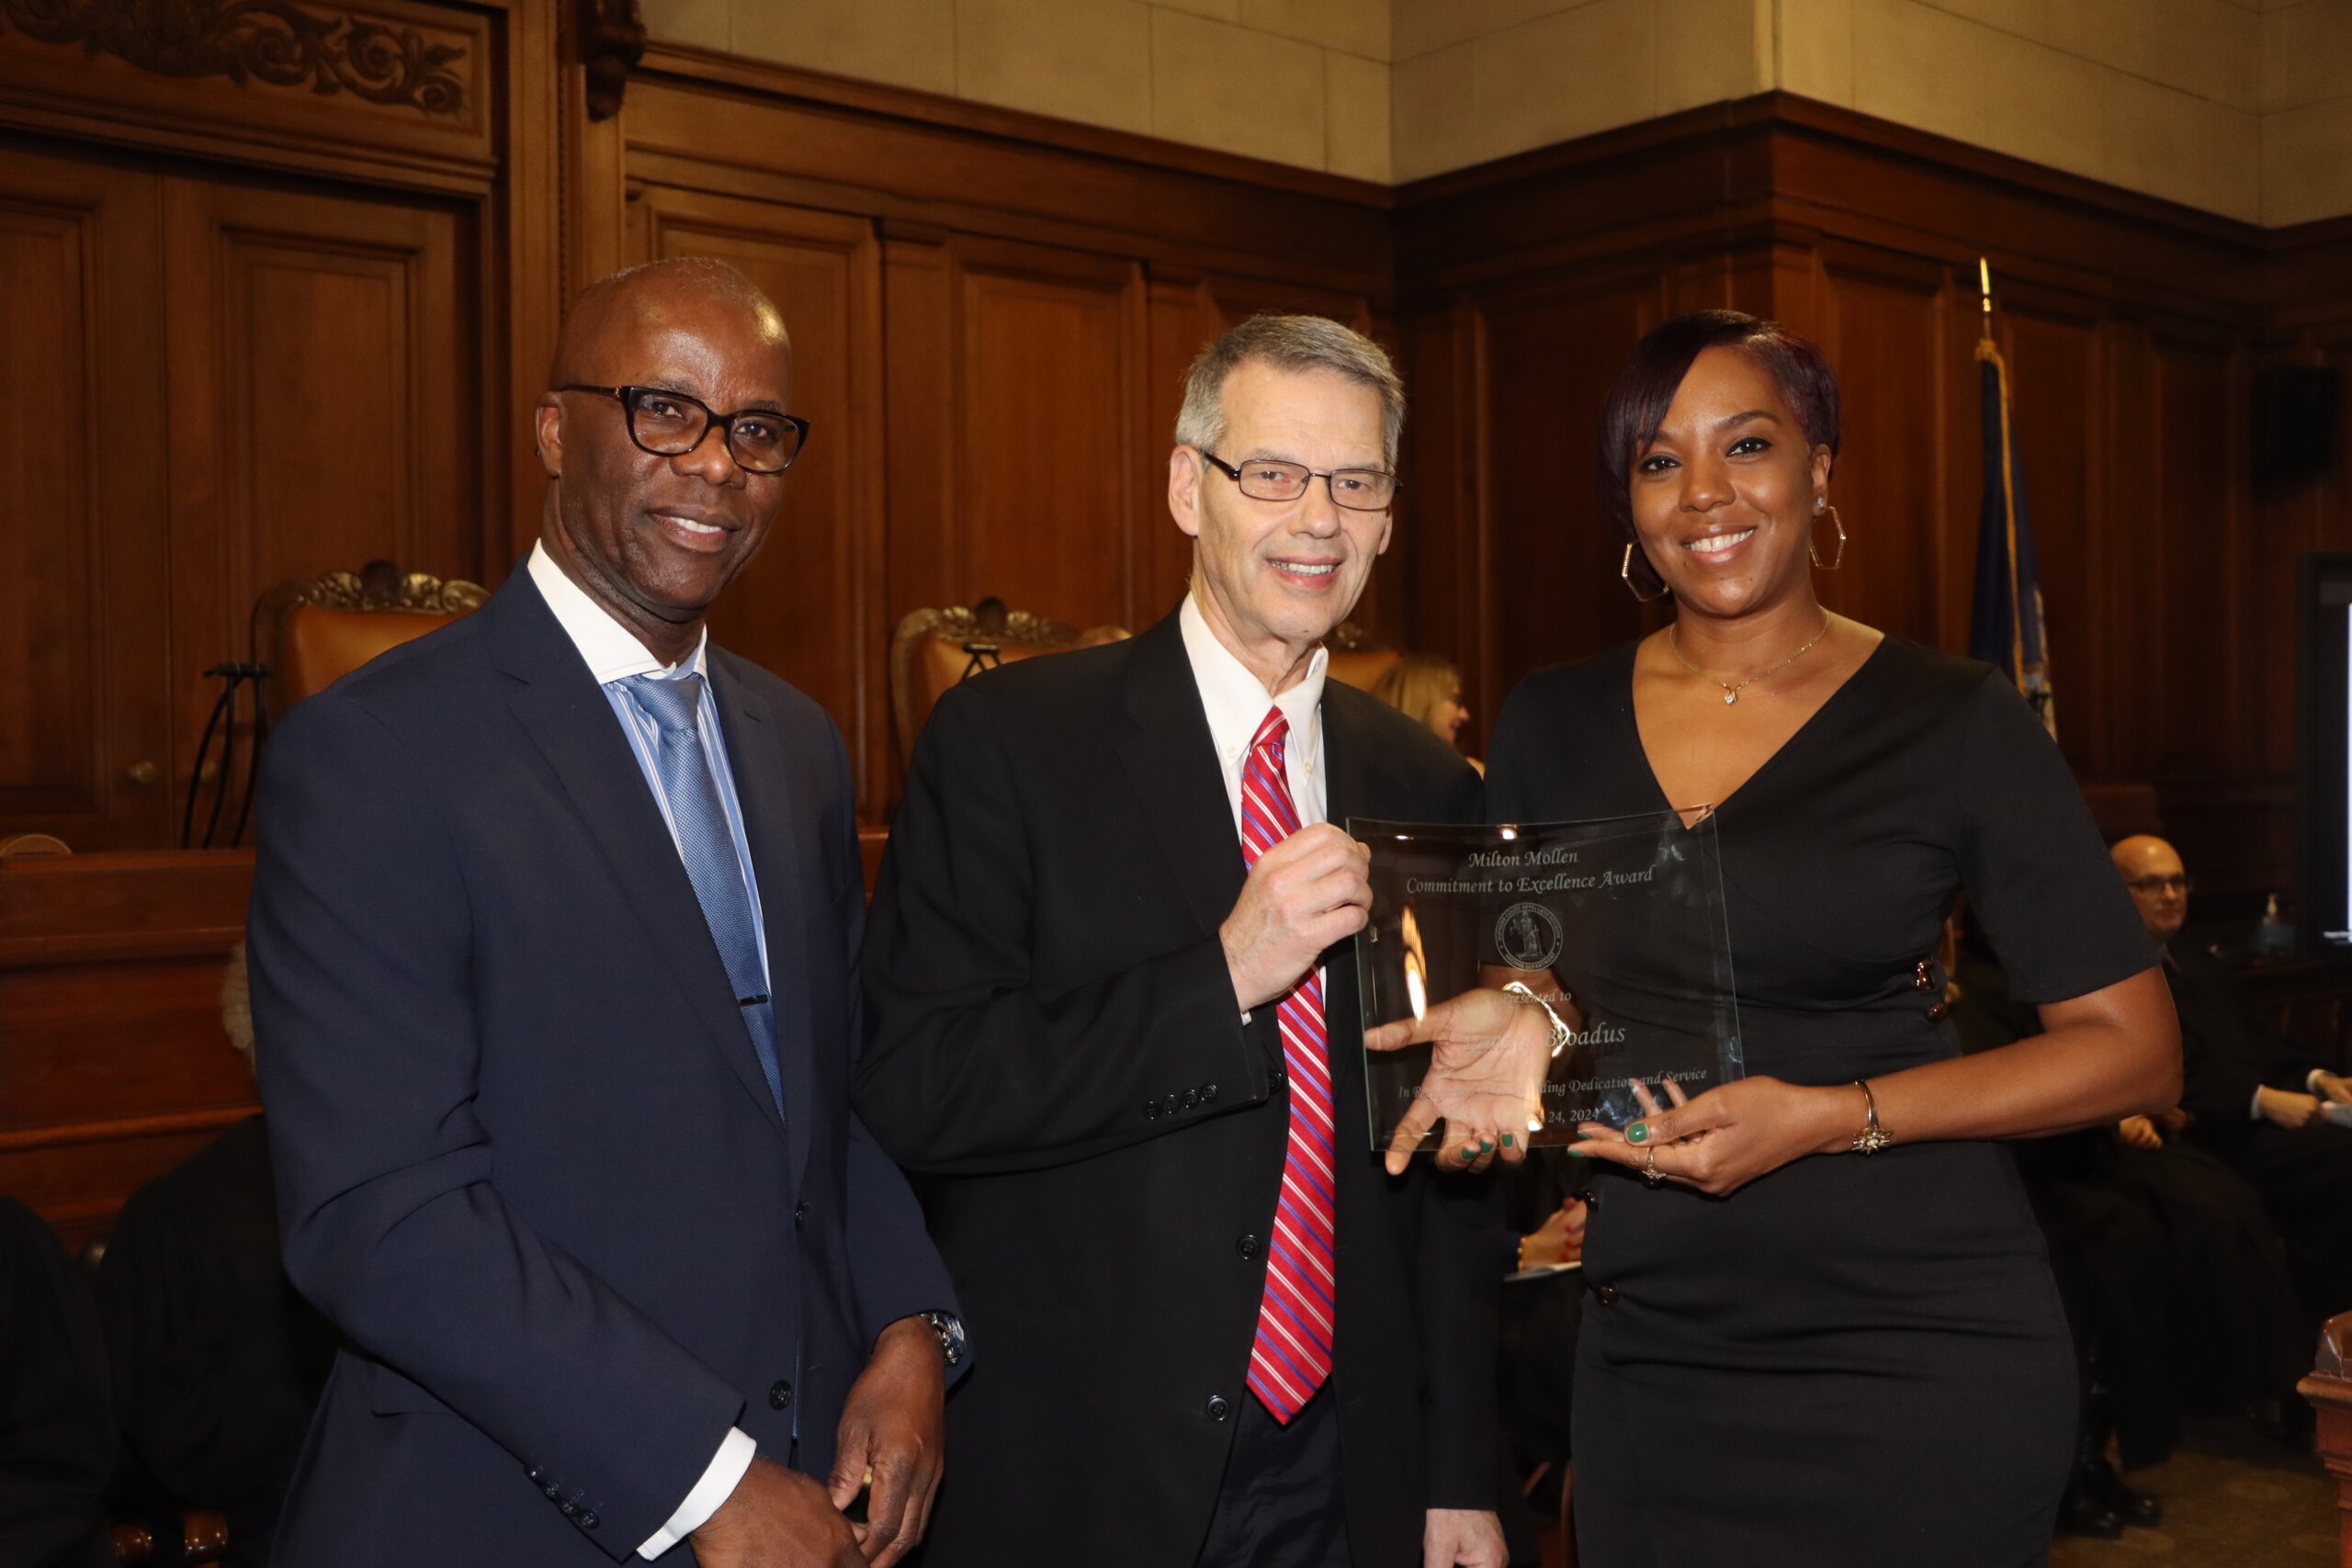 Tamara Broadus, a court clerk specialist from the Kings County Supreme Court, Civil Term, was presented with the Mollen Award by Chief Clerk Charles Small (left) and Administrative Judge Lawrence Knipel (center).Photos: Mario Belluomo/Brooklyn Eagle